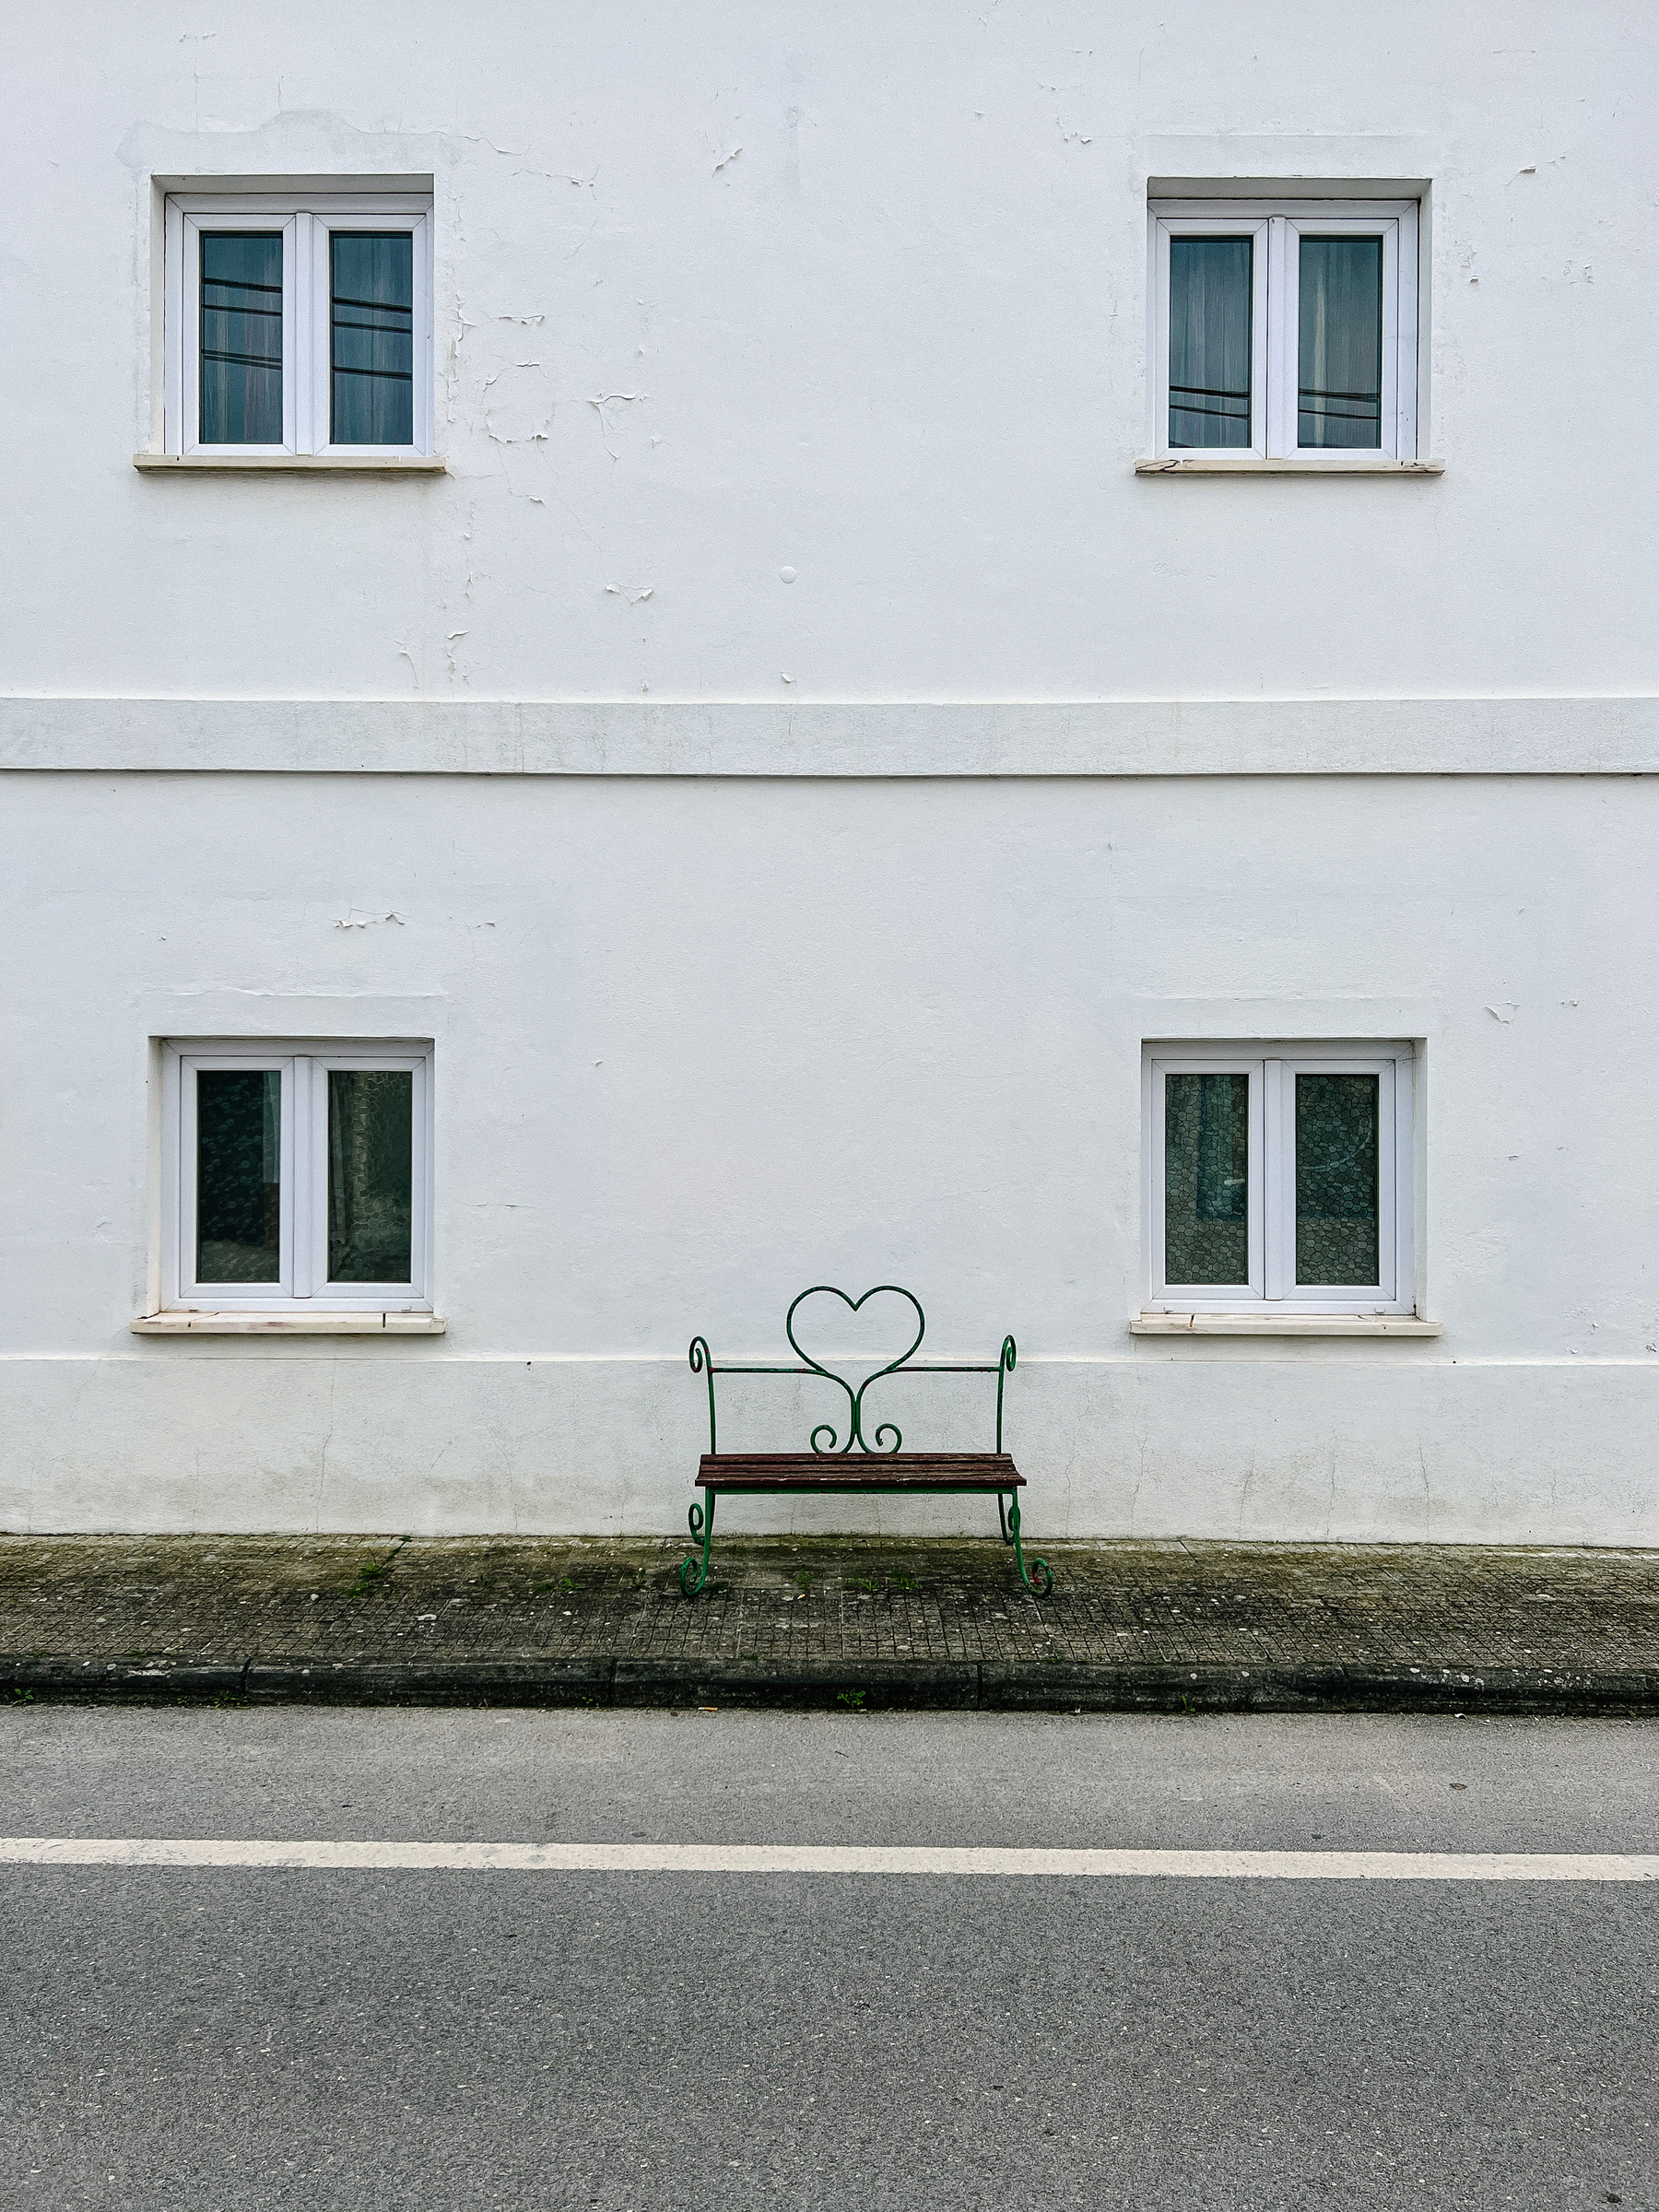 A bench with a heart sits against a white wall with four windows.